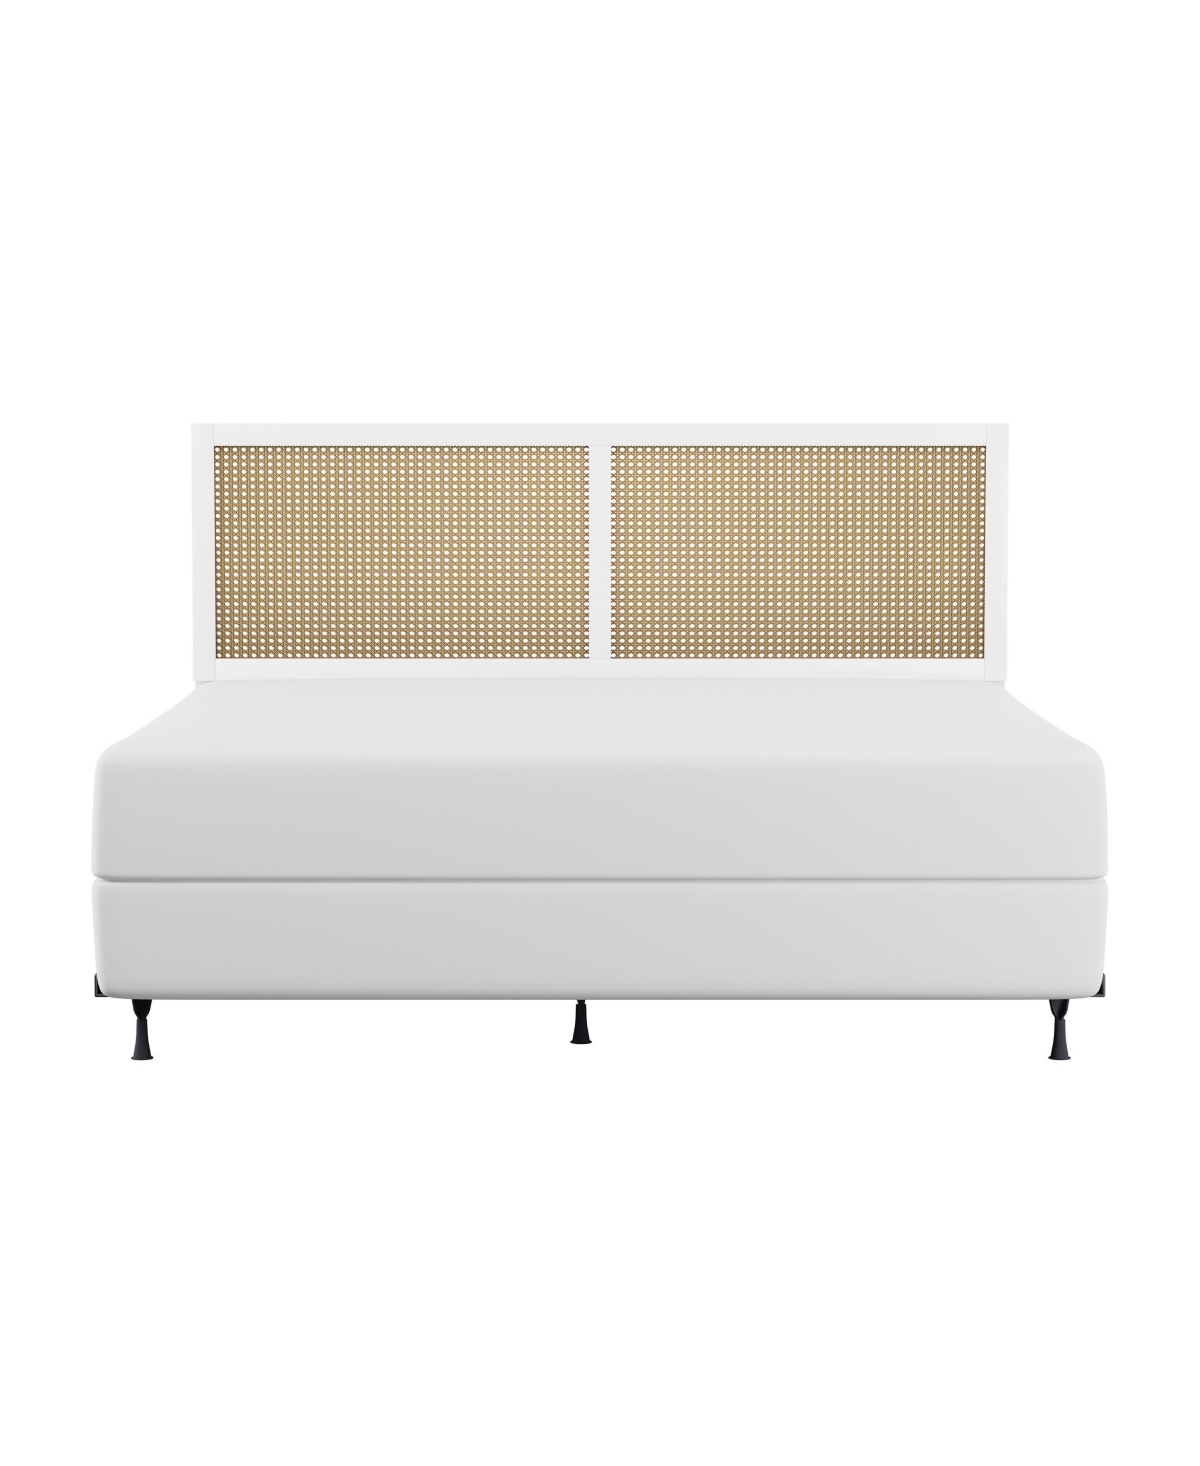 Hillsdale 50" Wood And Cane Panel Serena Furniture King Headboard With Frame In White